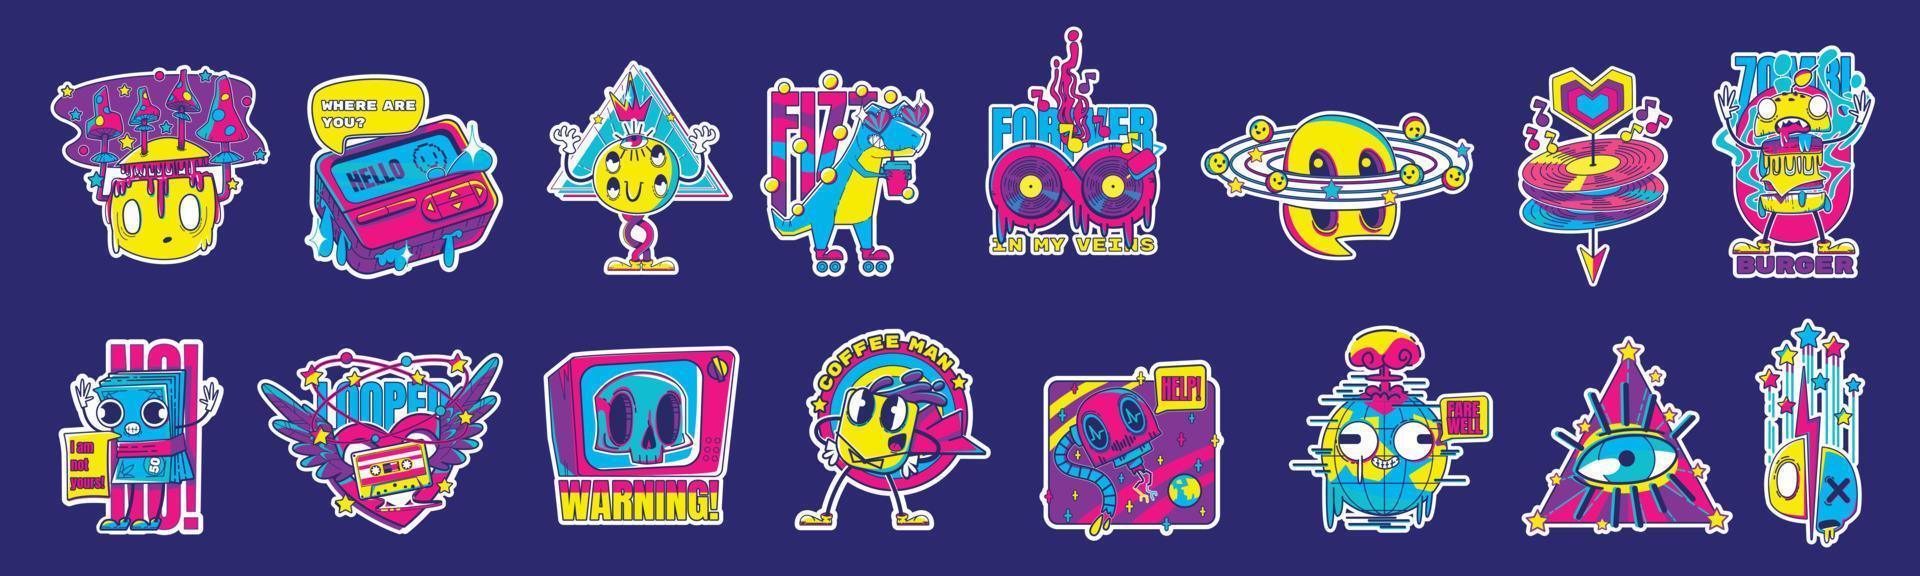 Retro rave stickers, comic patches vector